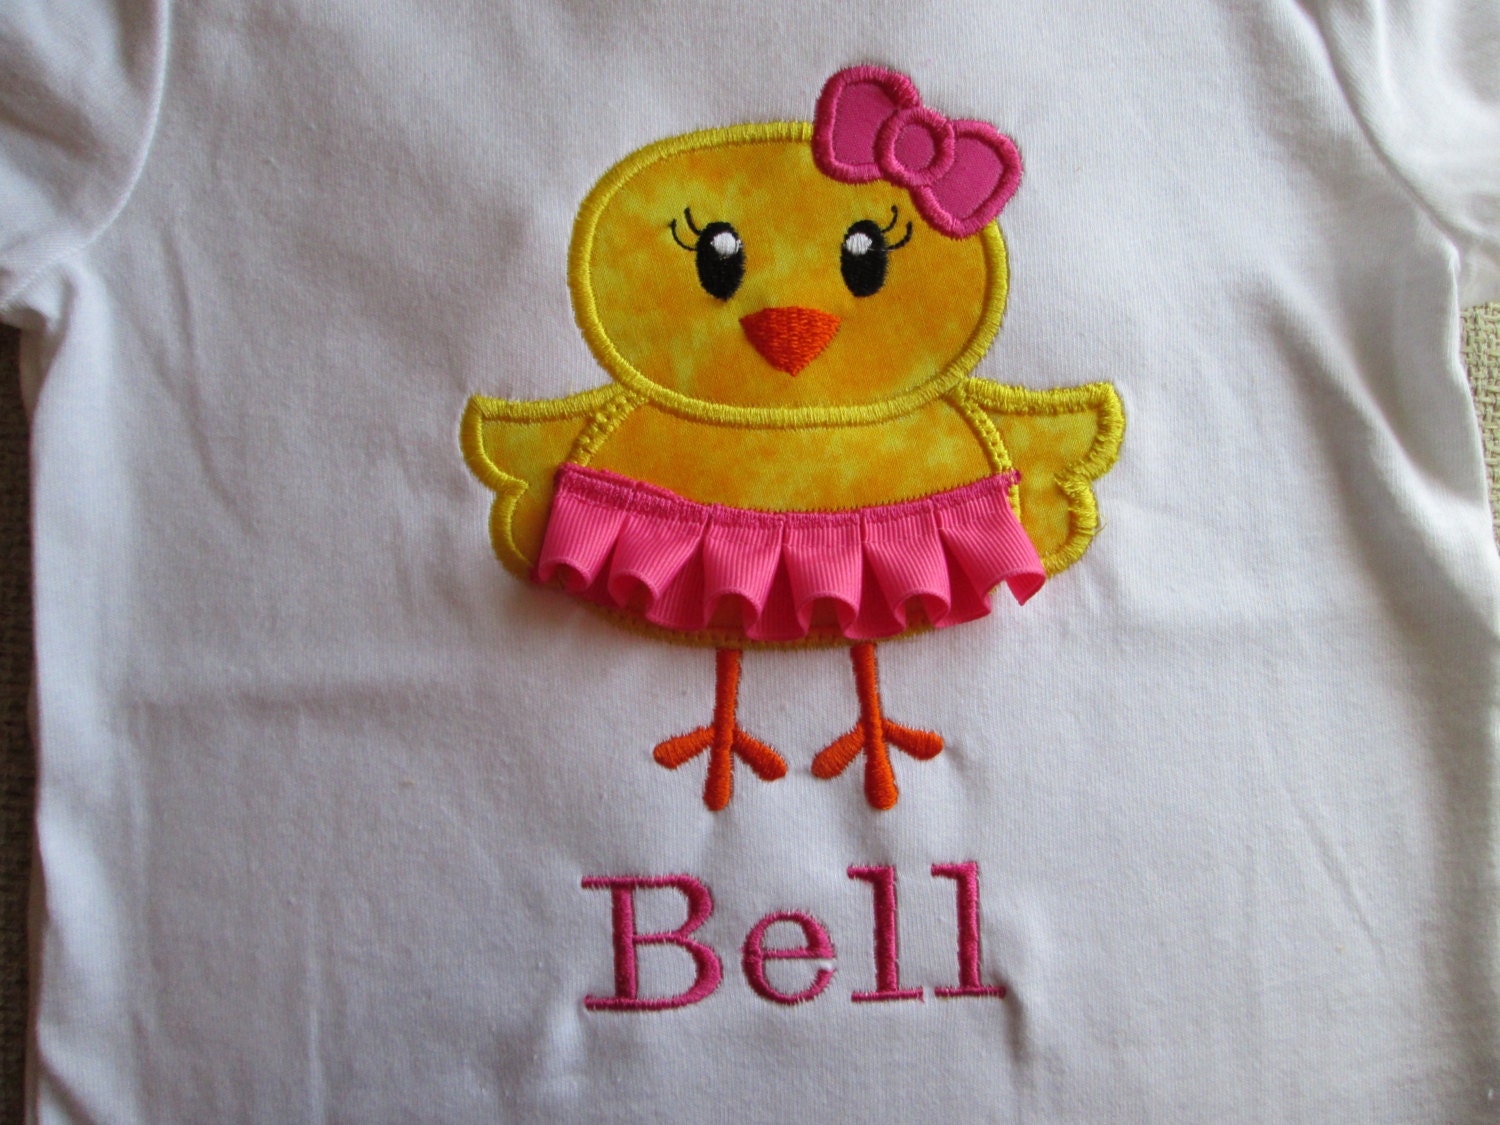 Personallized Chick tutu applique tee great for Easter